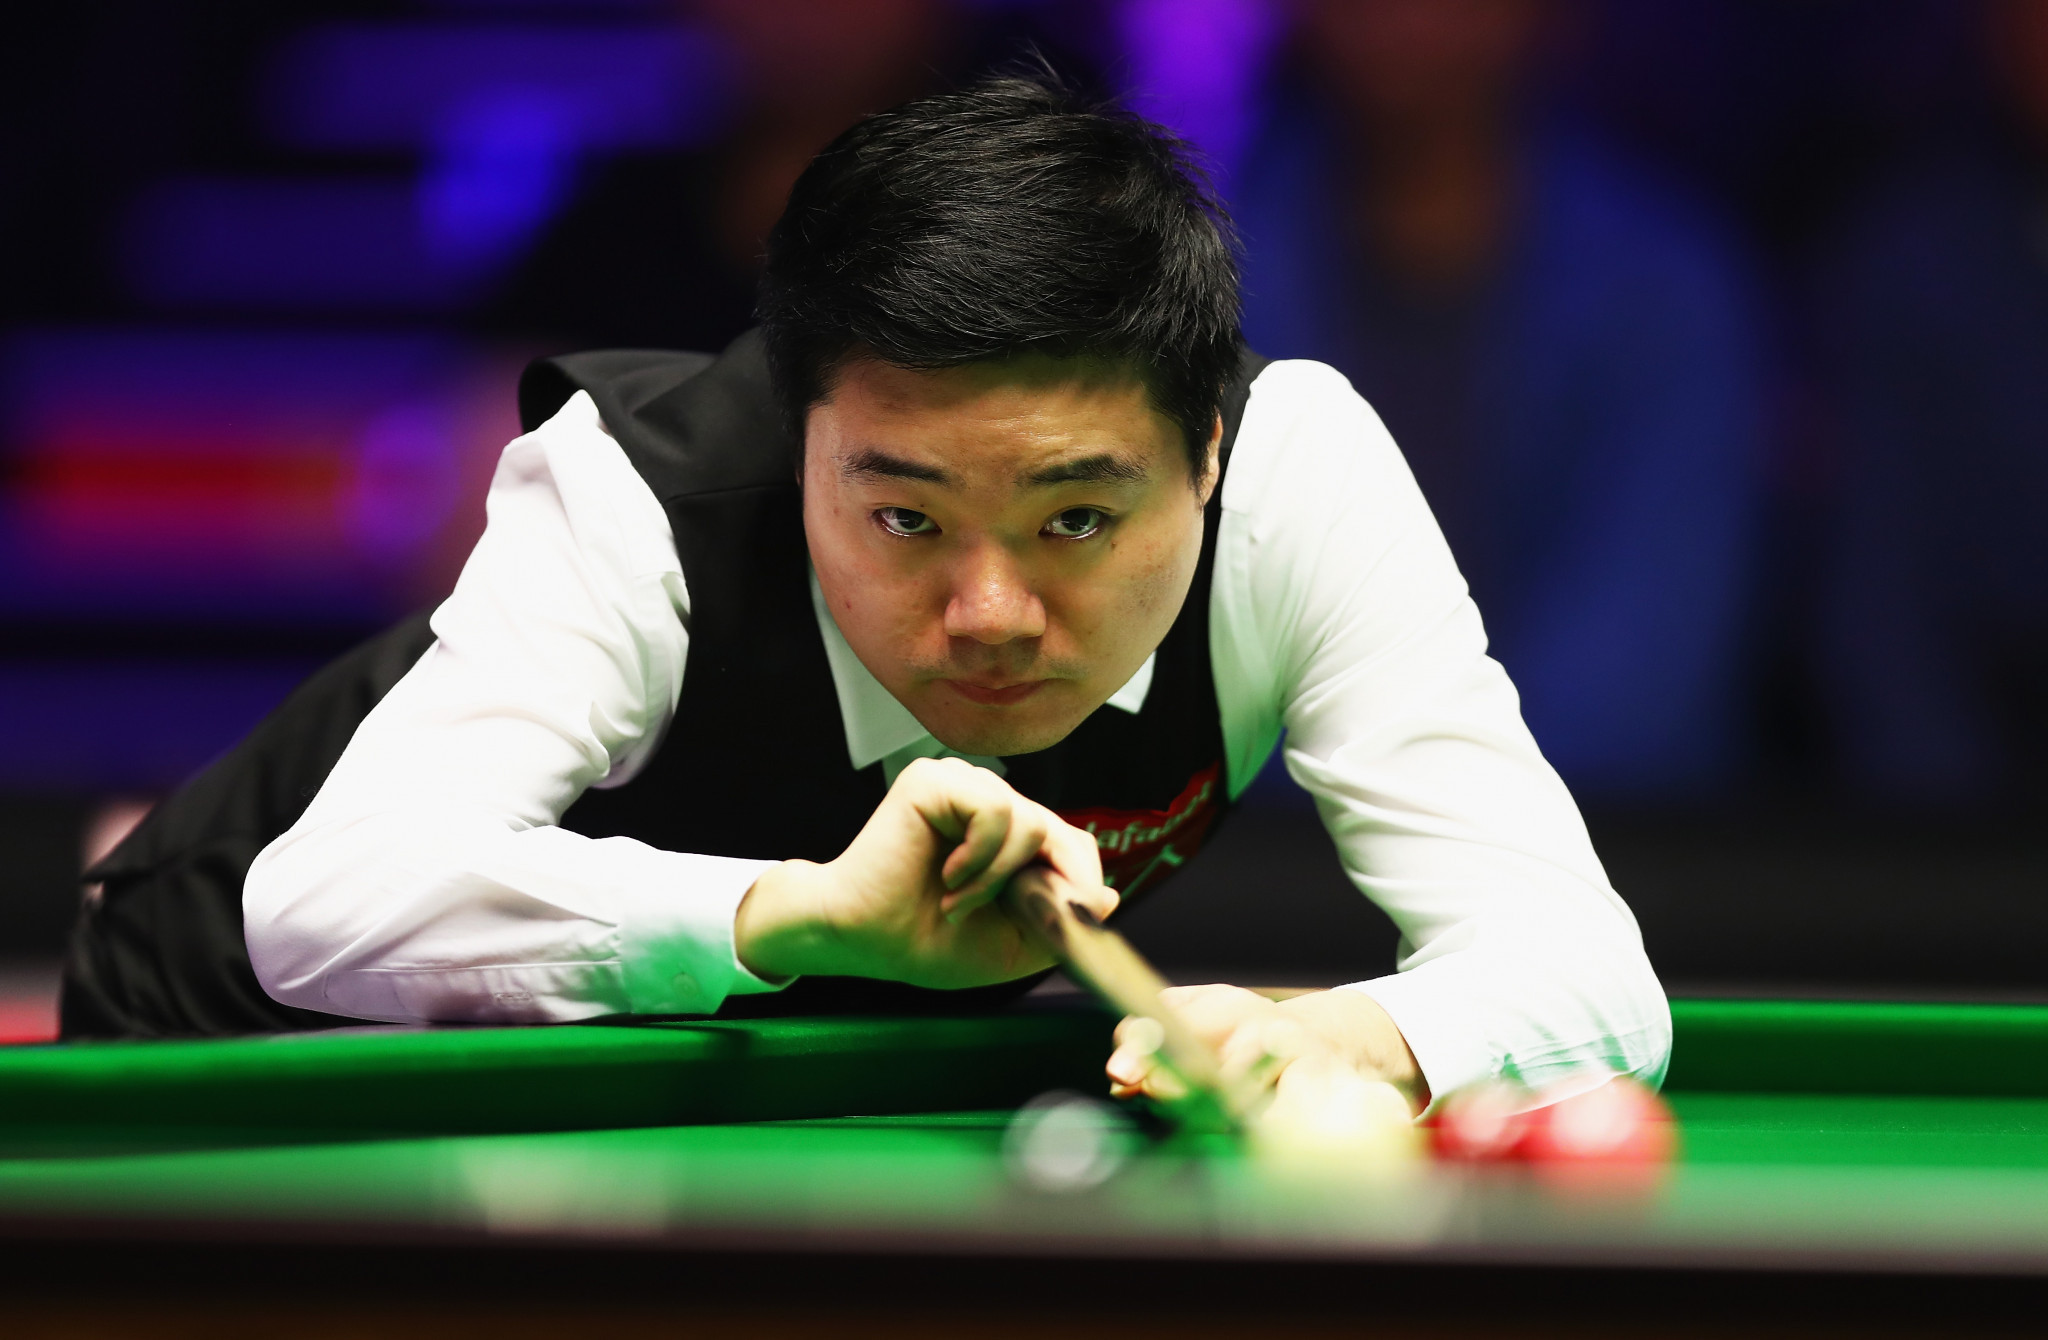 World Snooker Championship favourite Ding Junhui on brink of Crucible exit